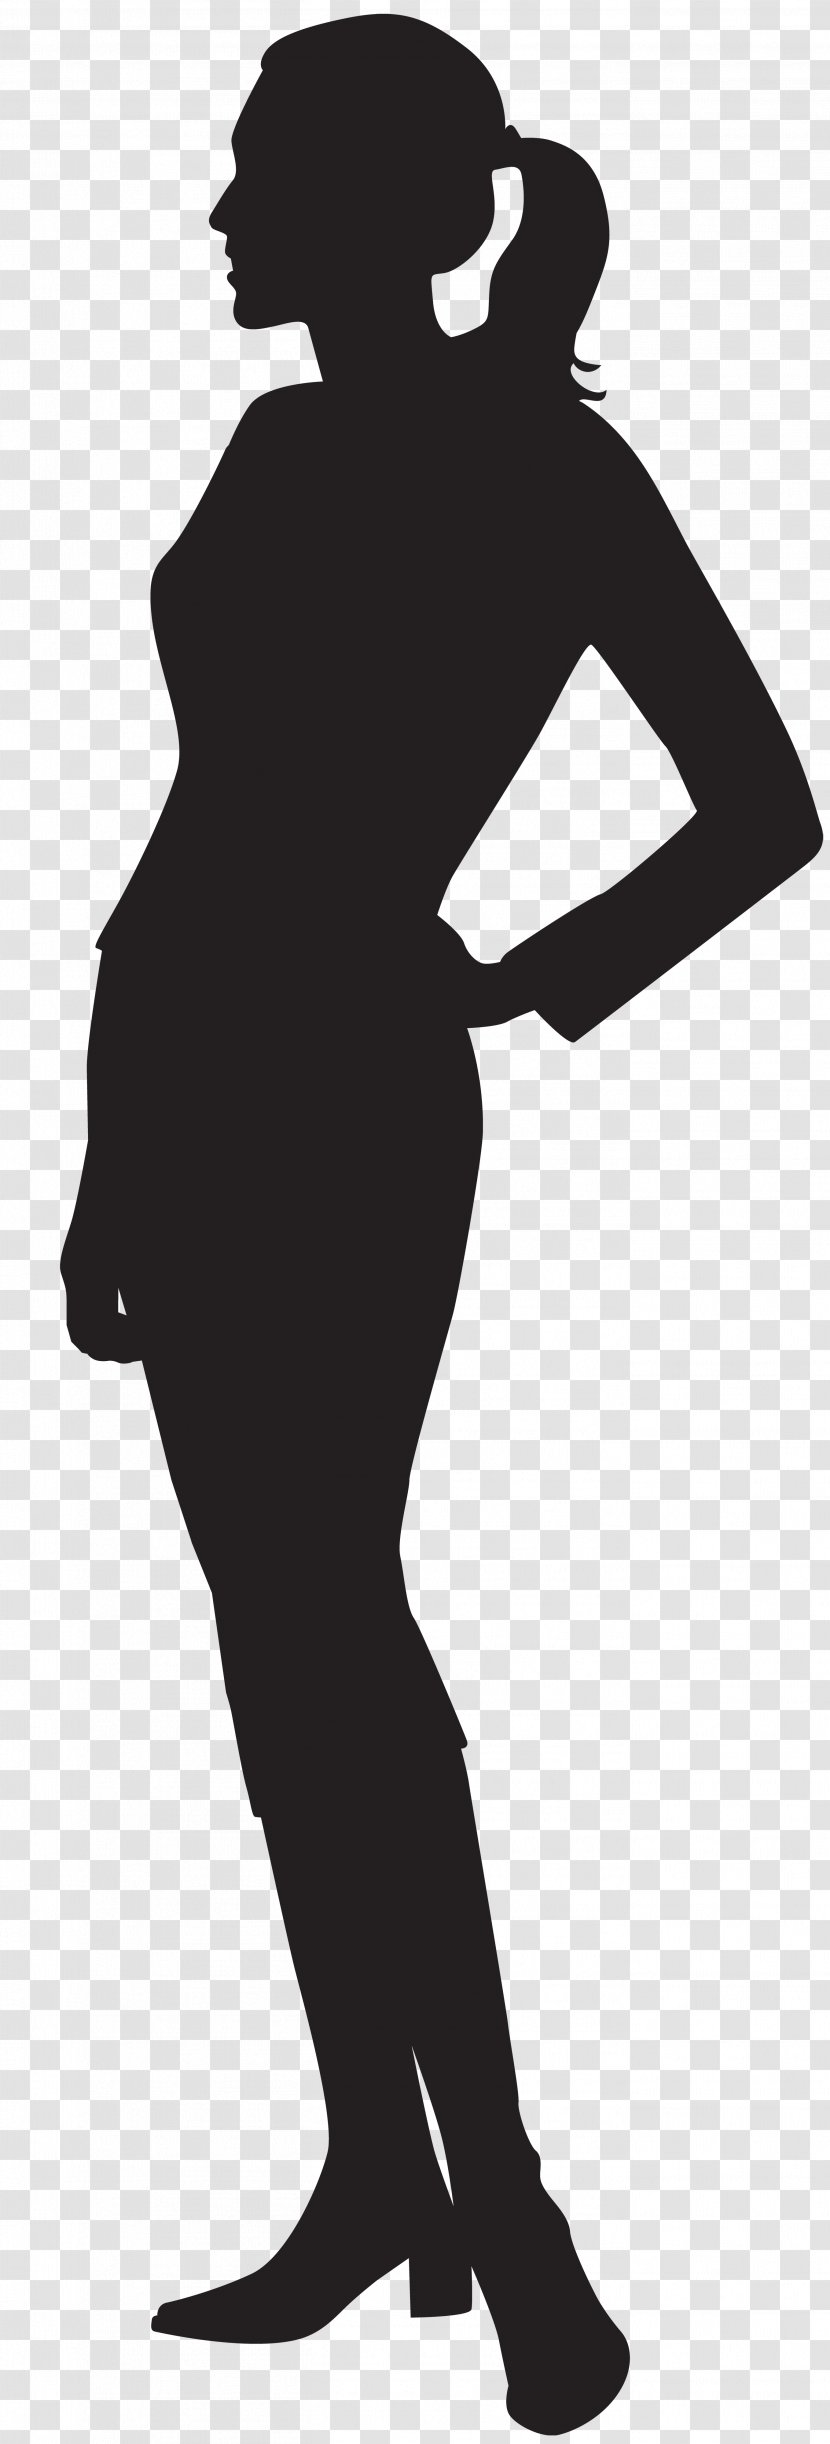 Silhouette Clip Art - Joint - Female Image Transparent PNG